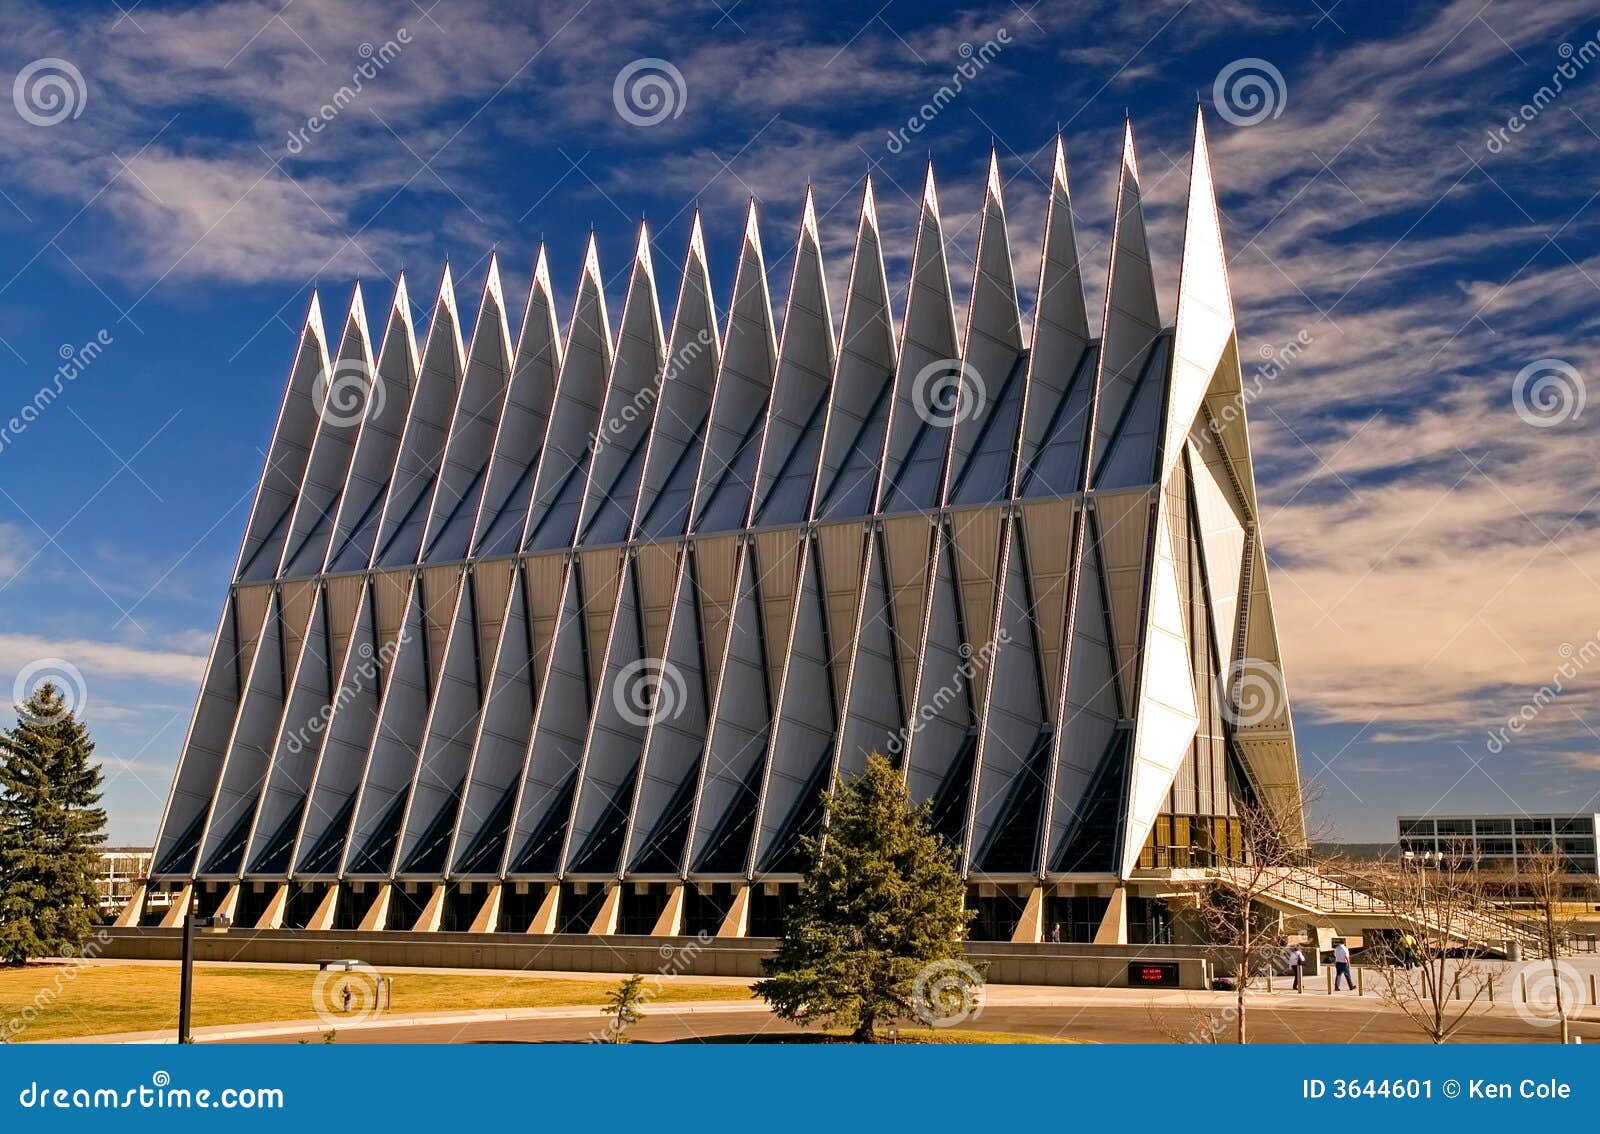 us air force academy chapel